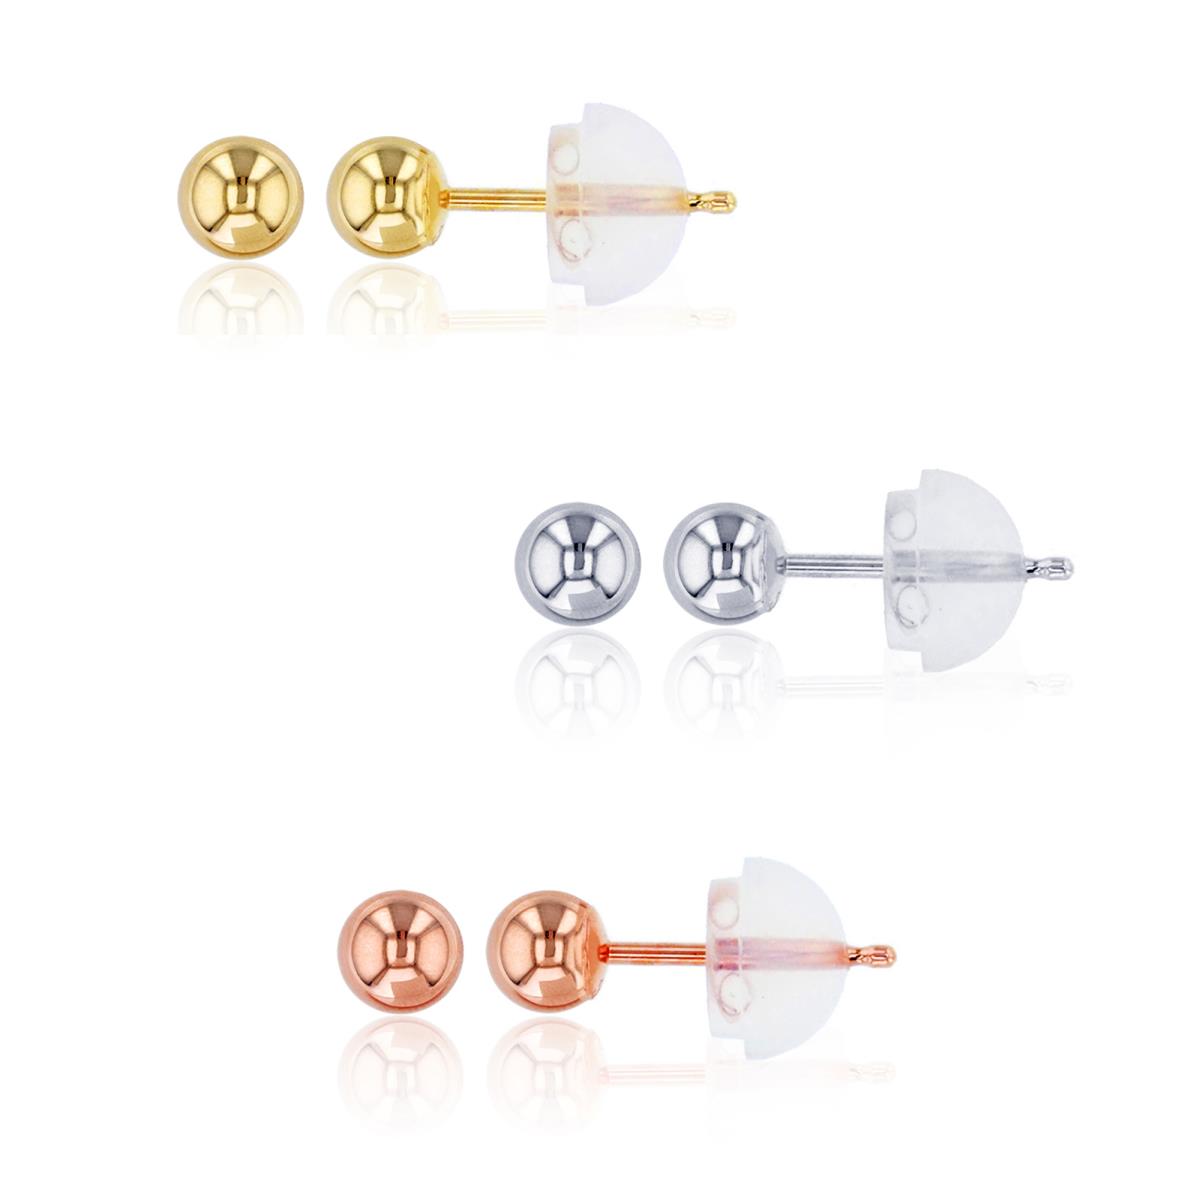 10K Gold Tricolor WYR 5MM Ball Stud Earring Set with 10K Silicone Backs 